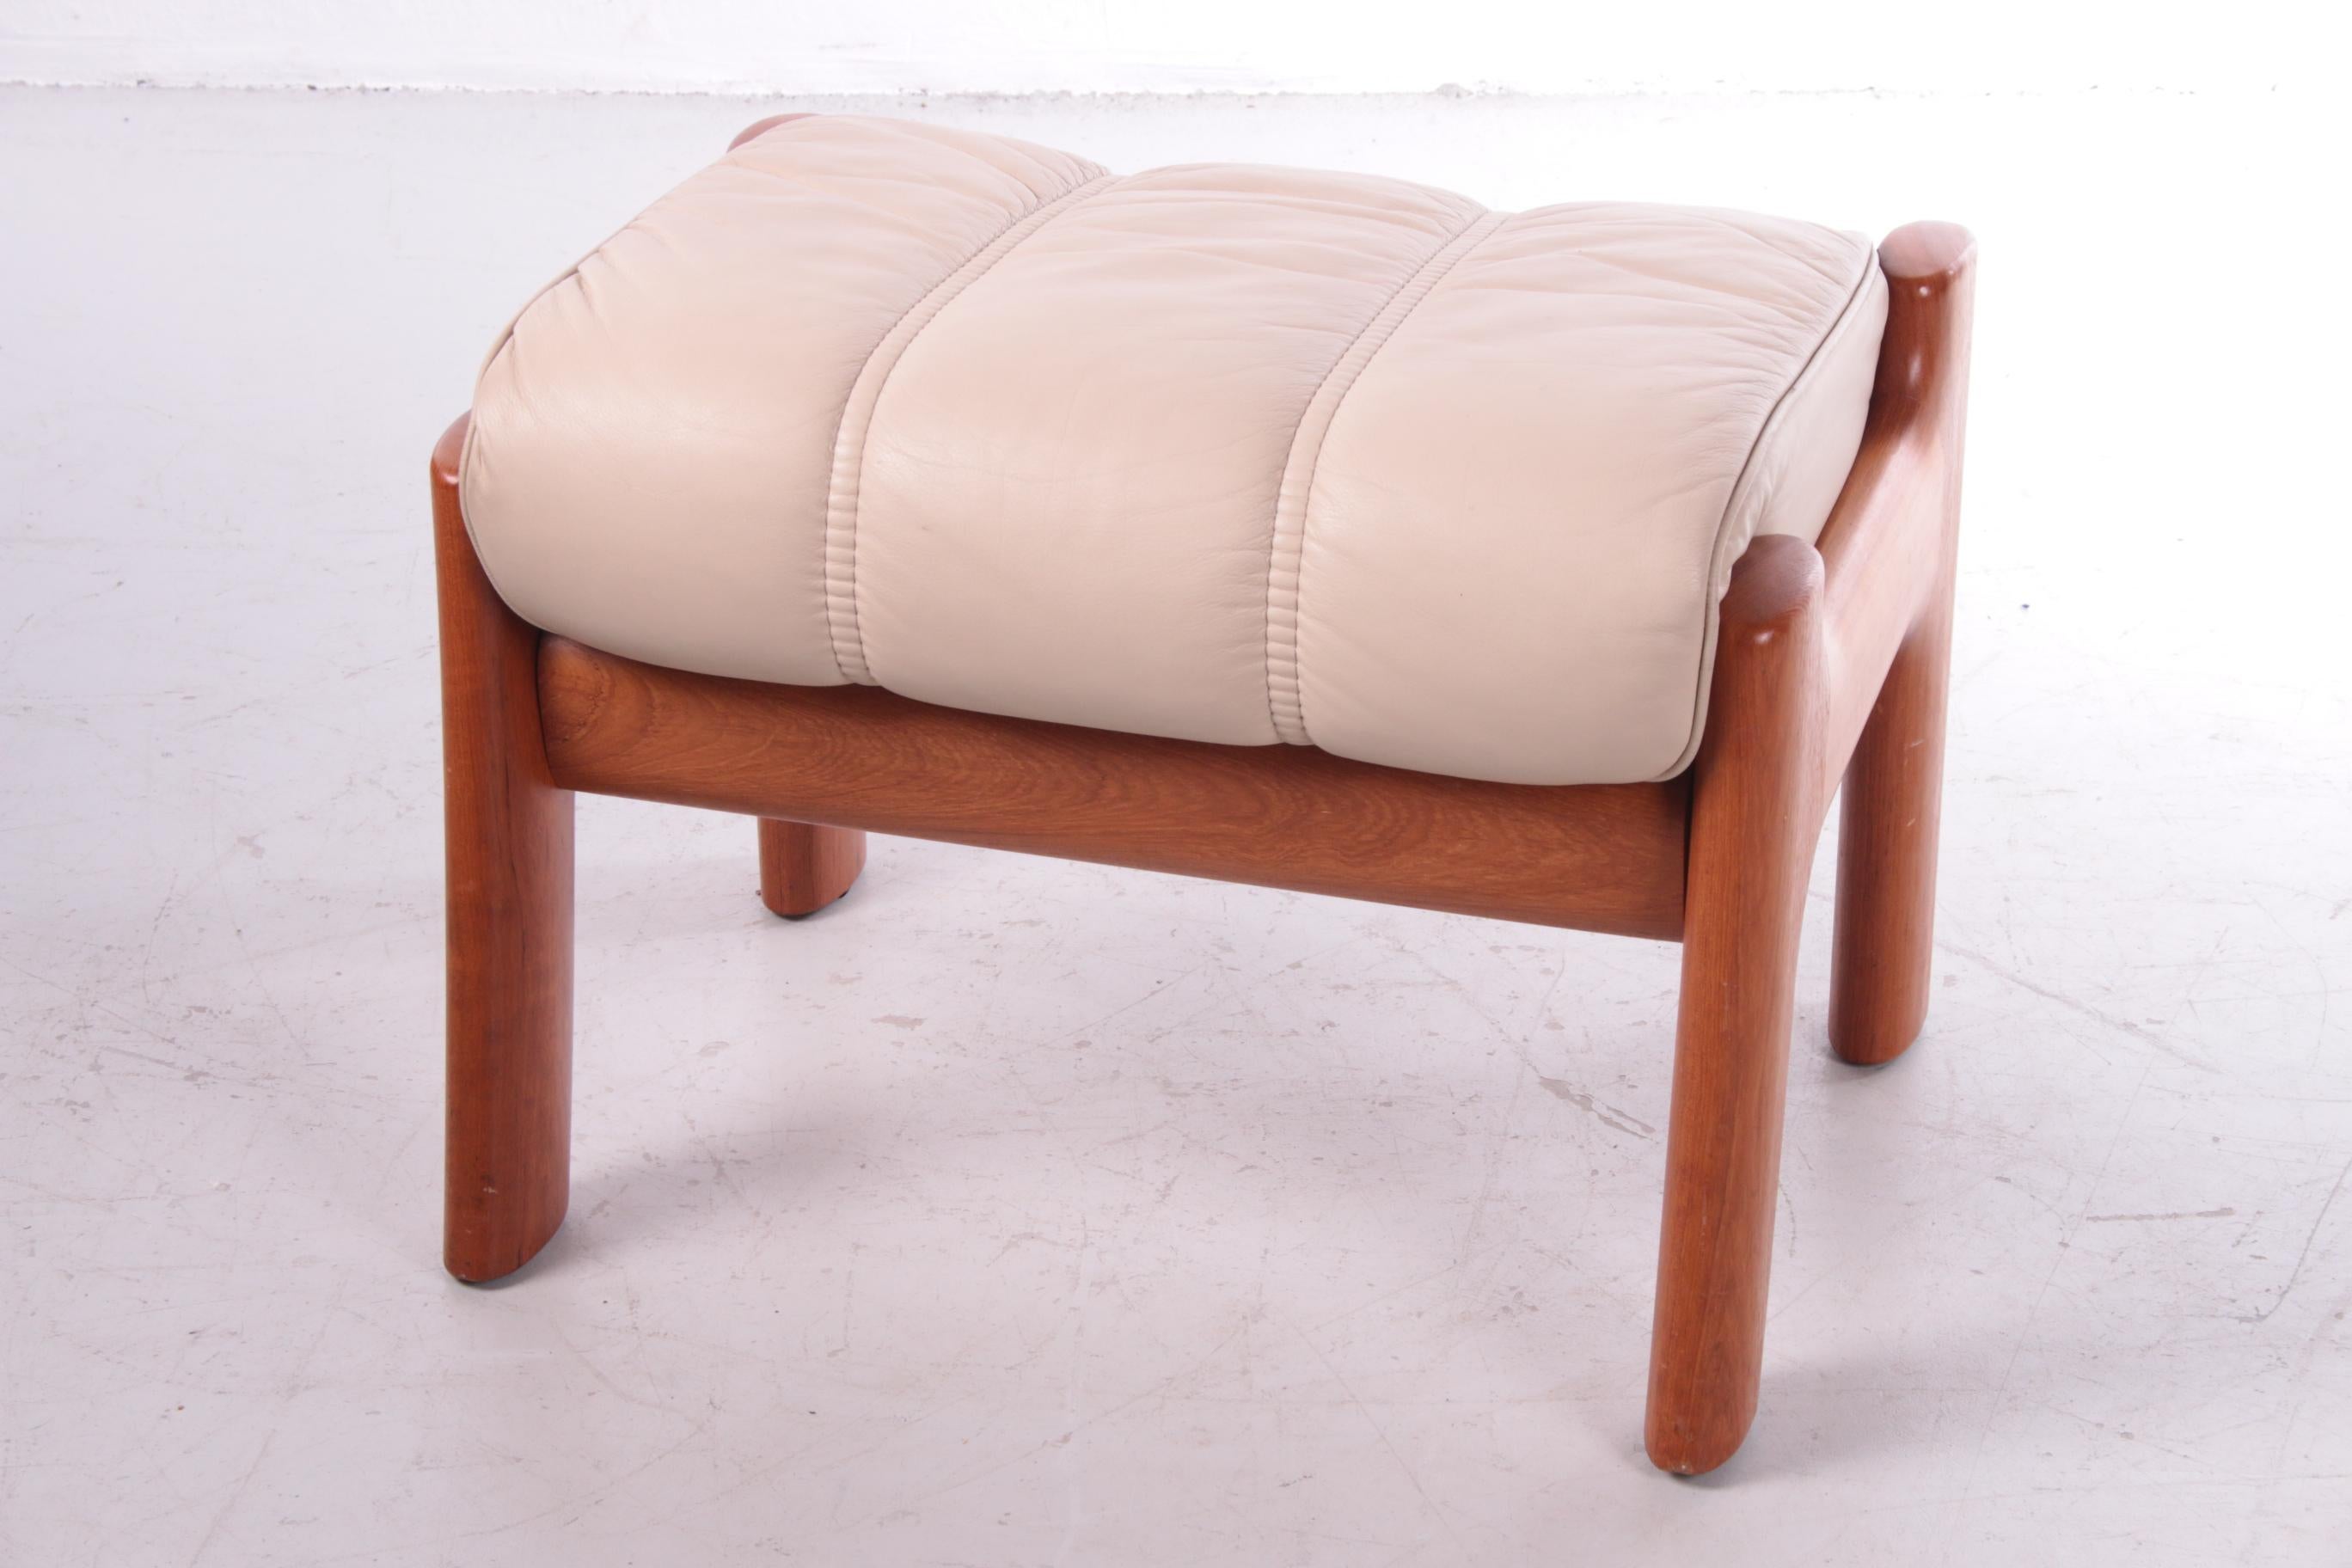 Mid-Century Modern Vintage Footrest Made of Teak with Leather 1970 For Sale